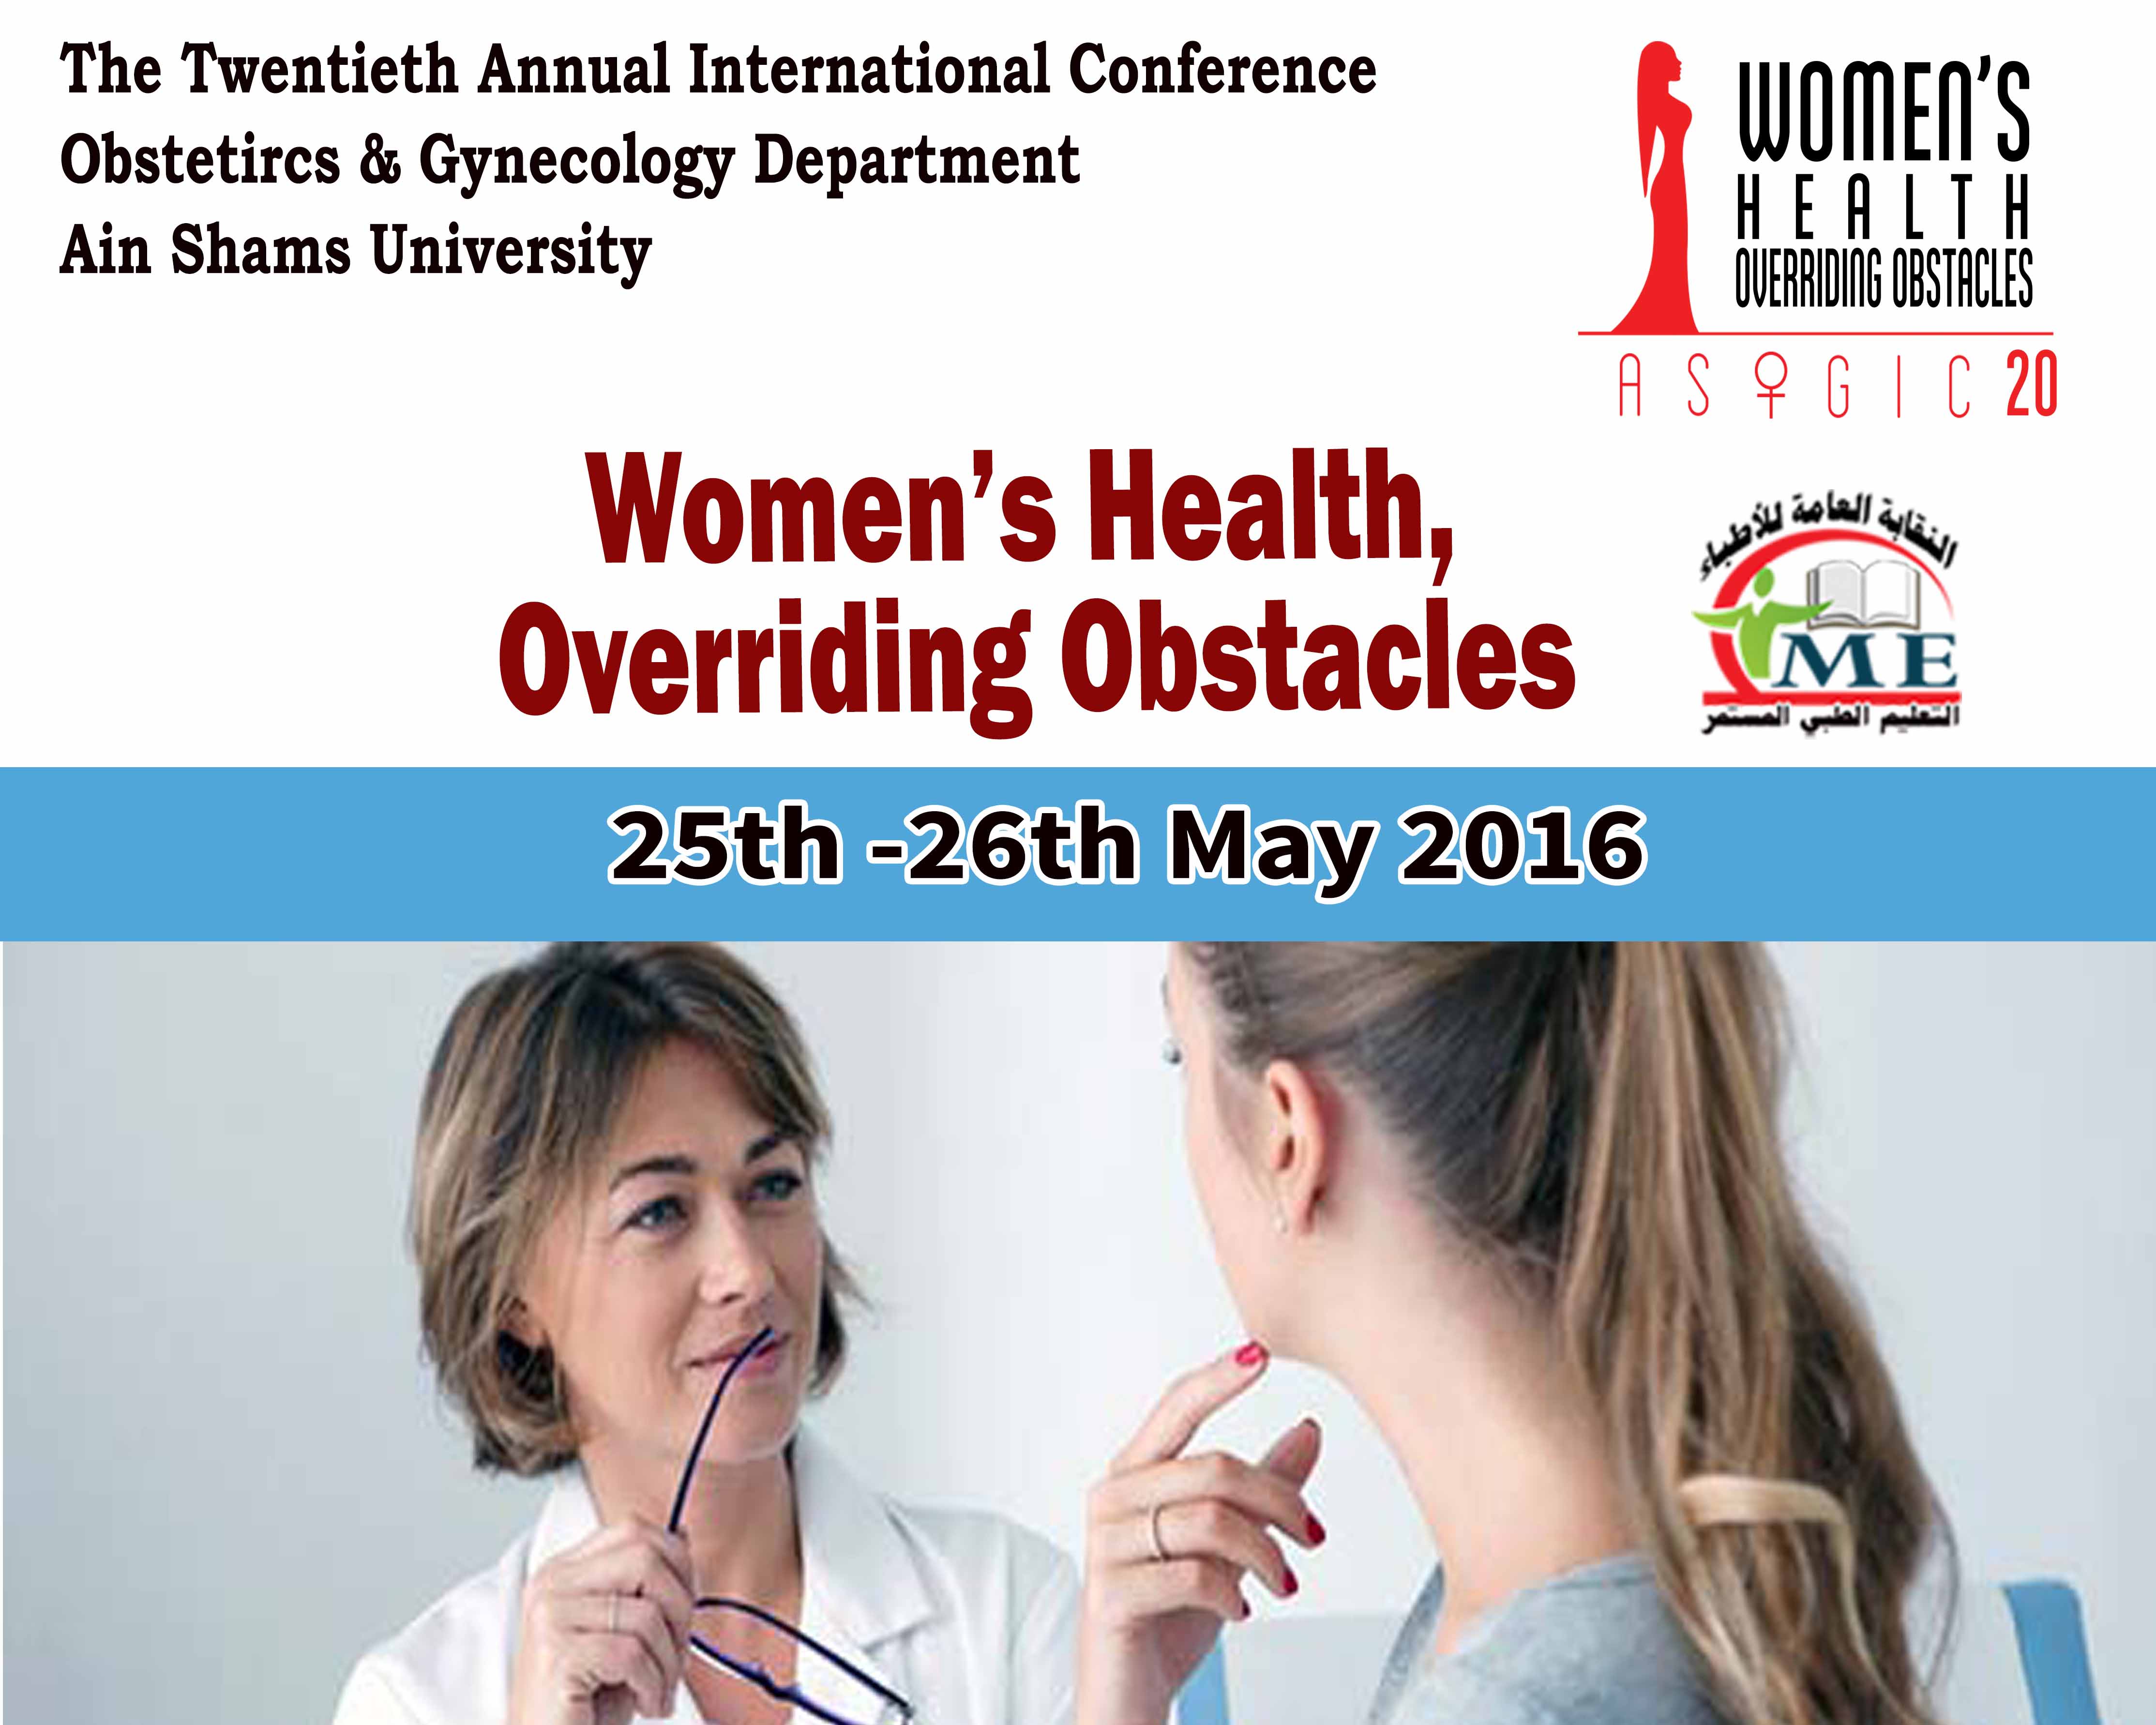 Women's Health, Overriding Obstacles